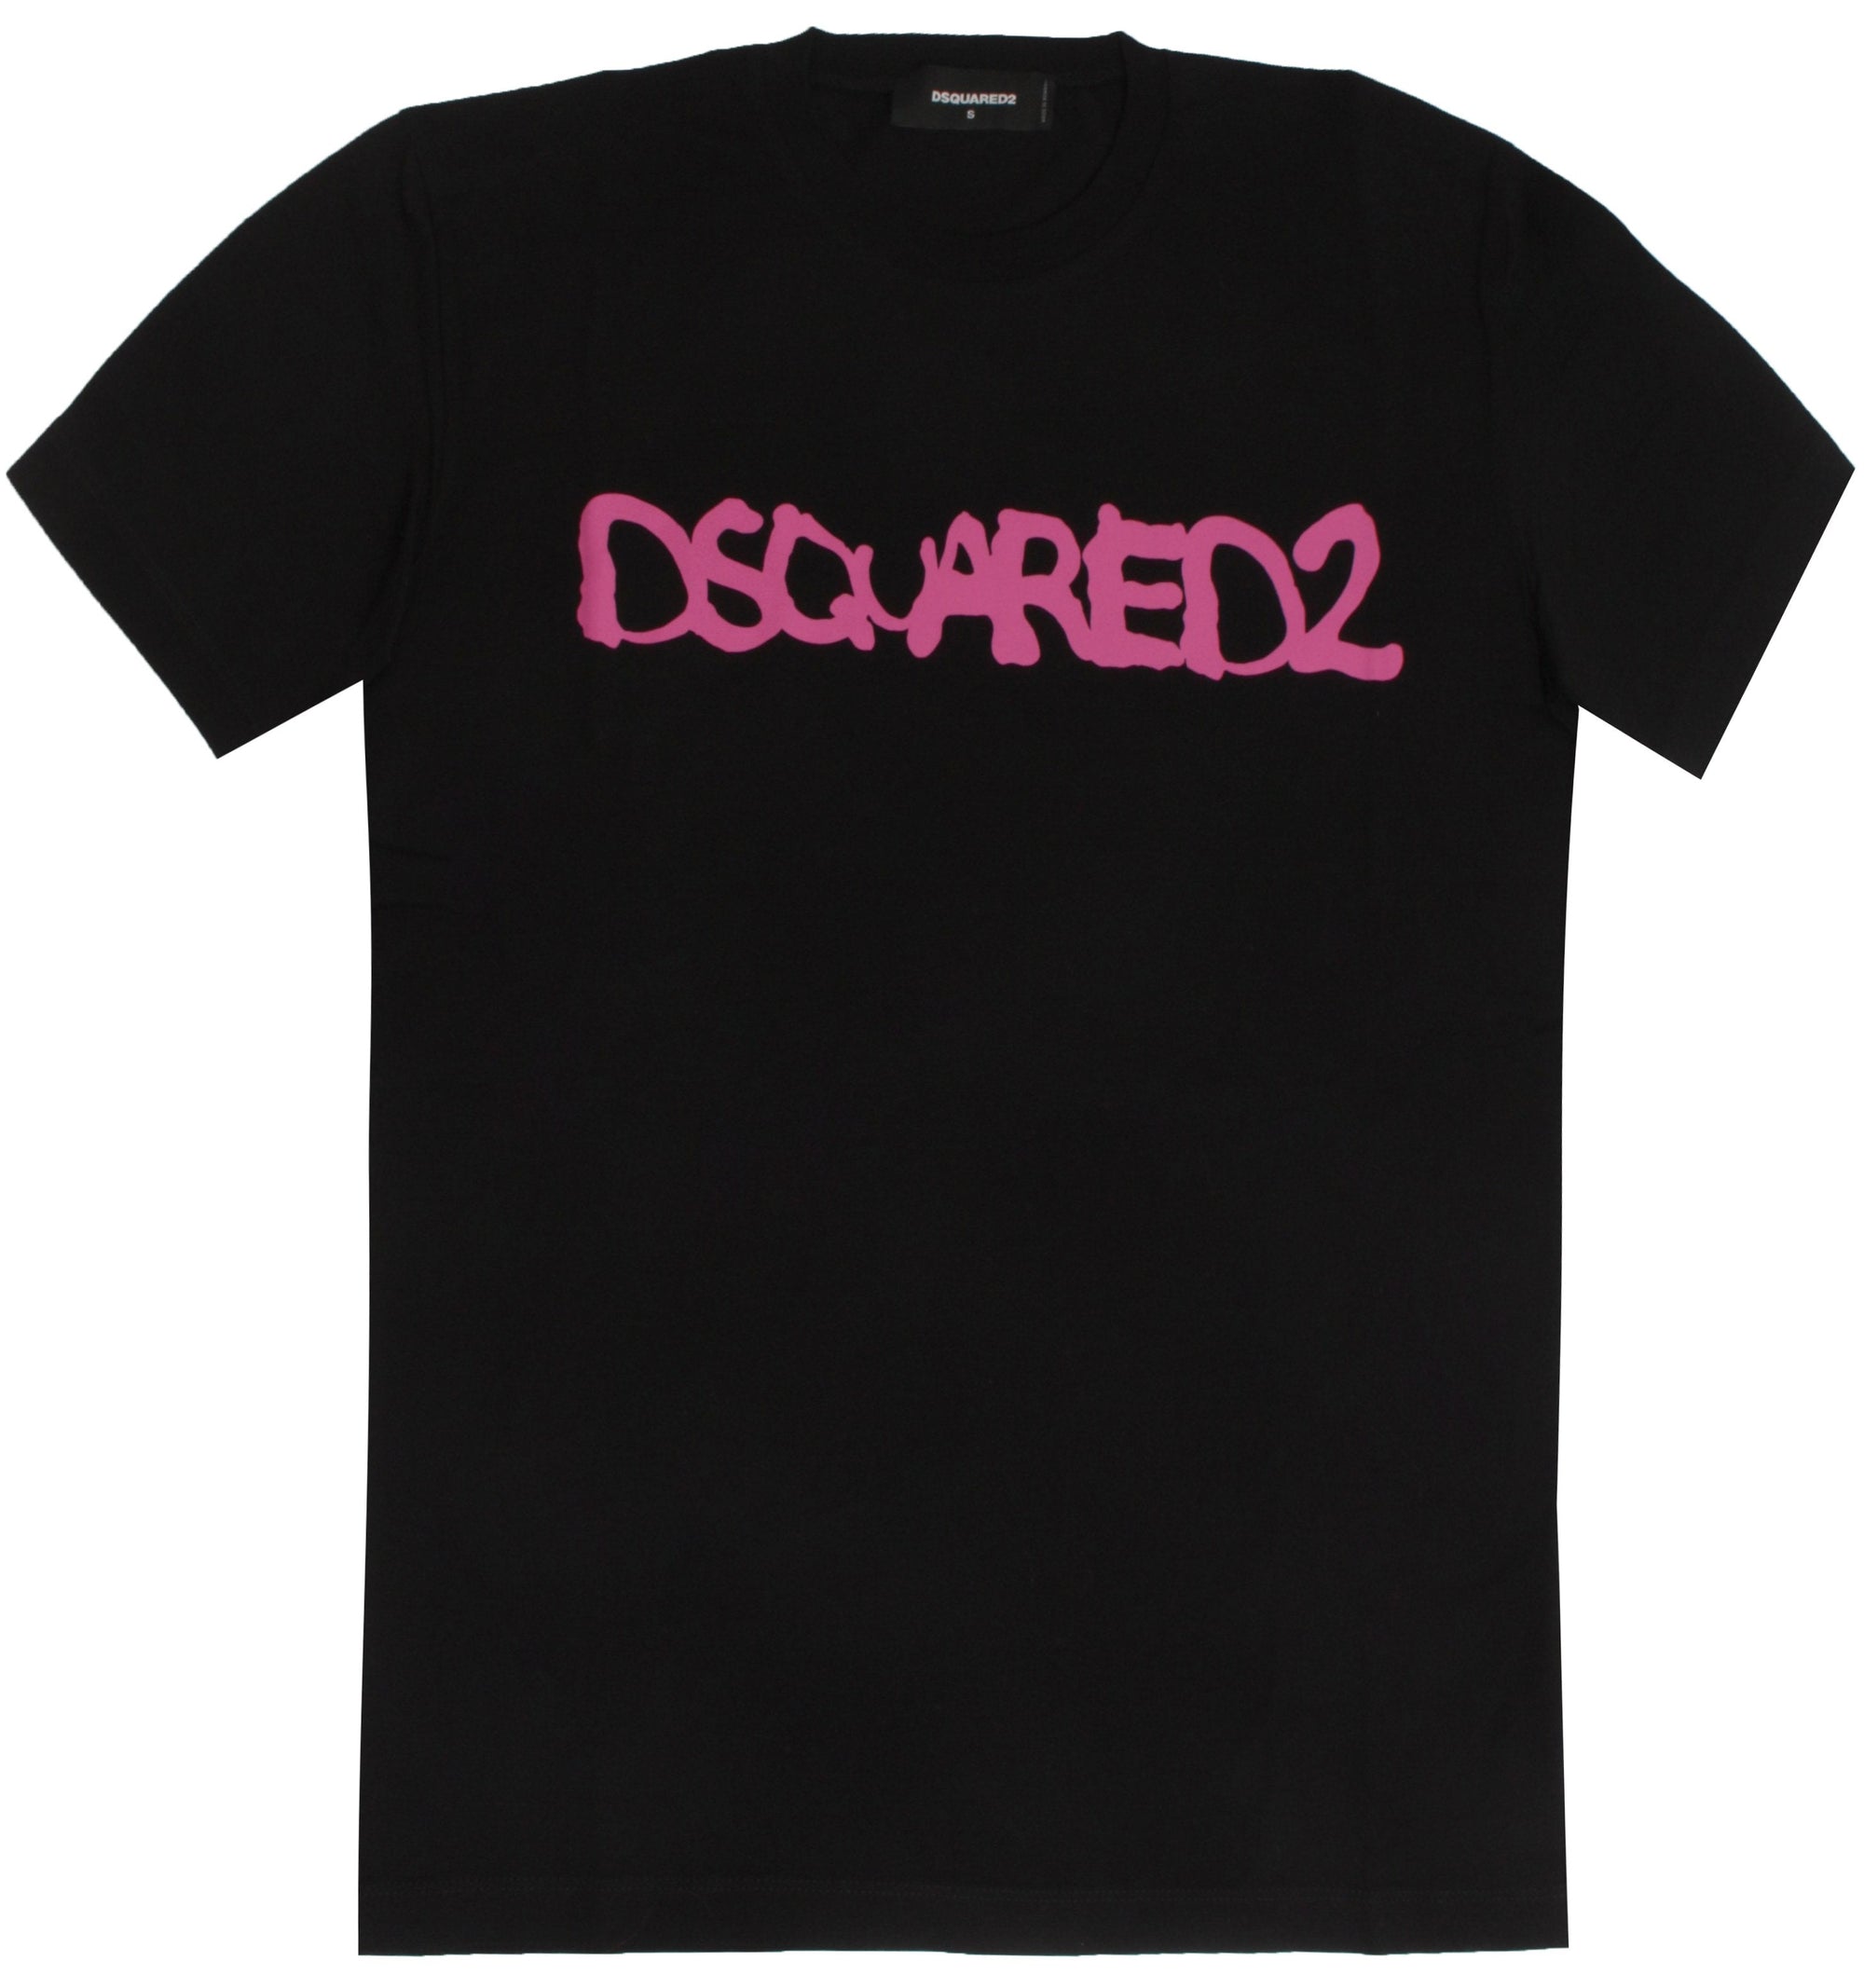 Black and Pink Graphic Logo Tee